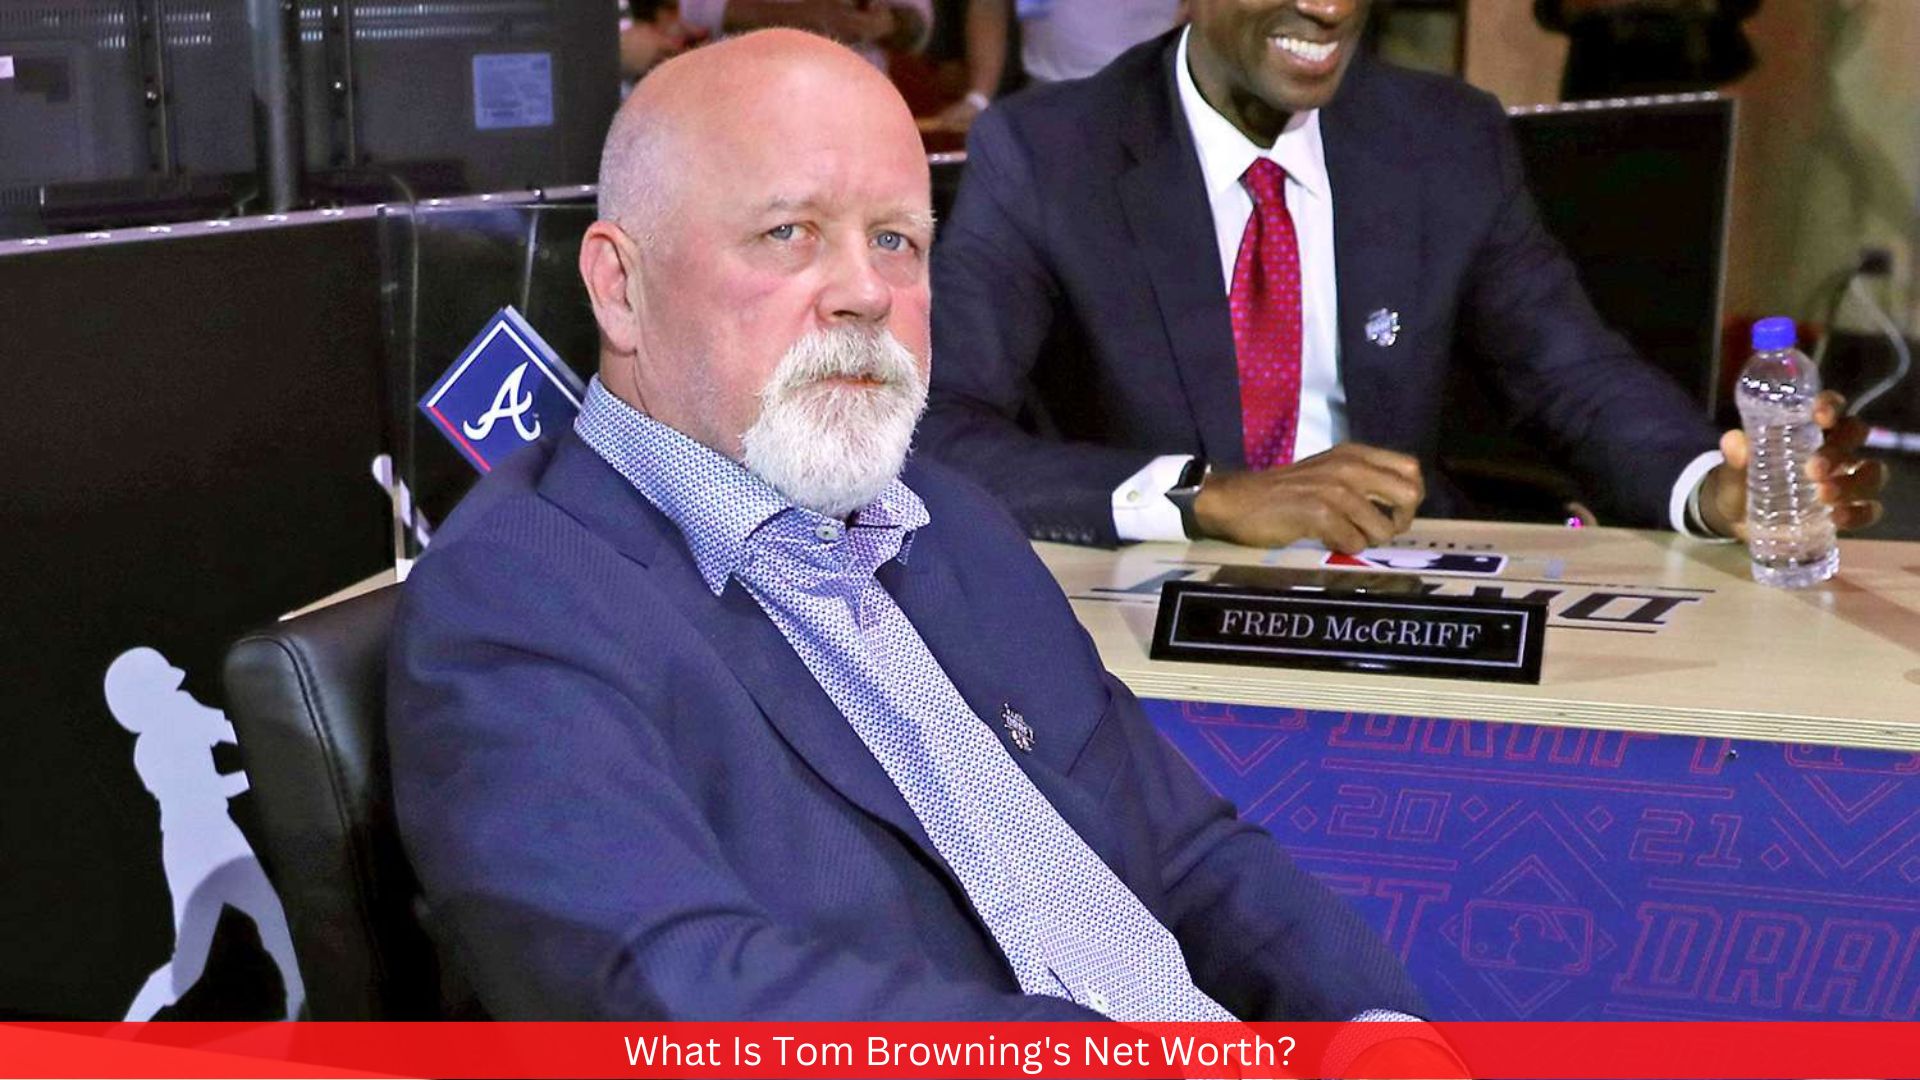 What Is Tom Browning's Net Worth?